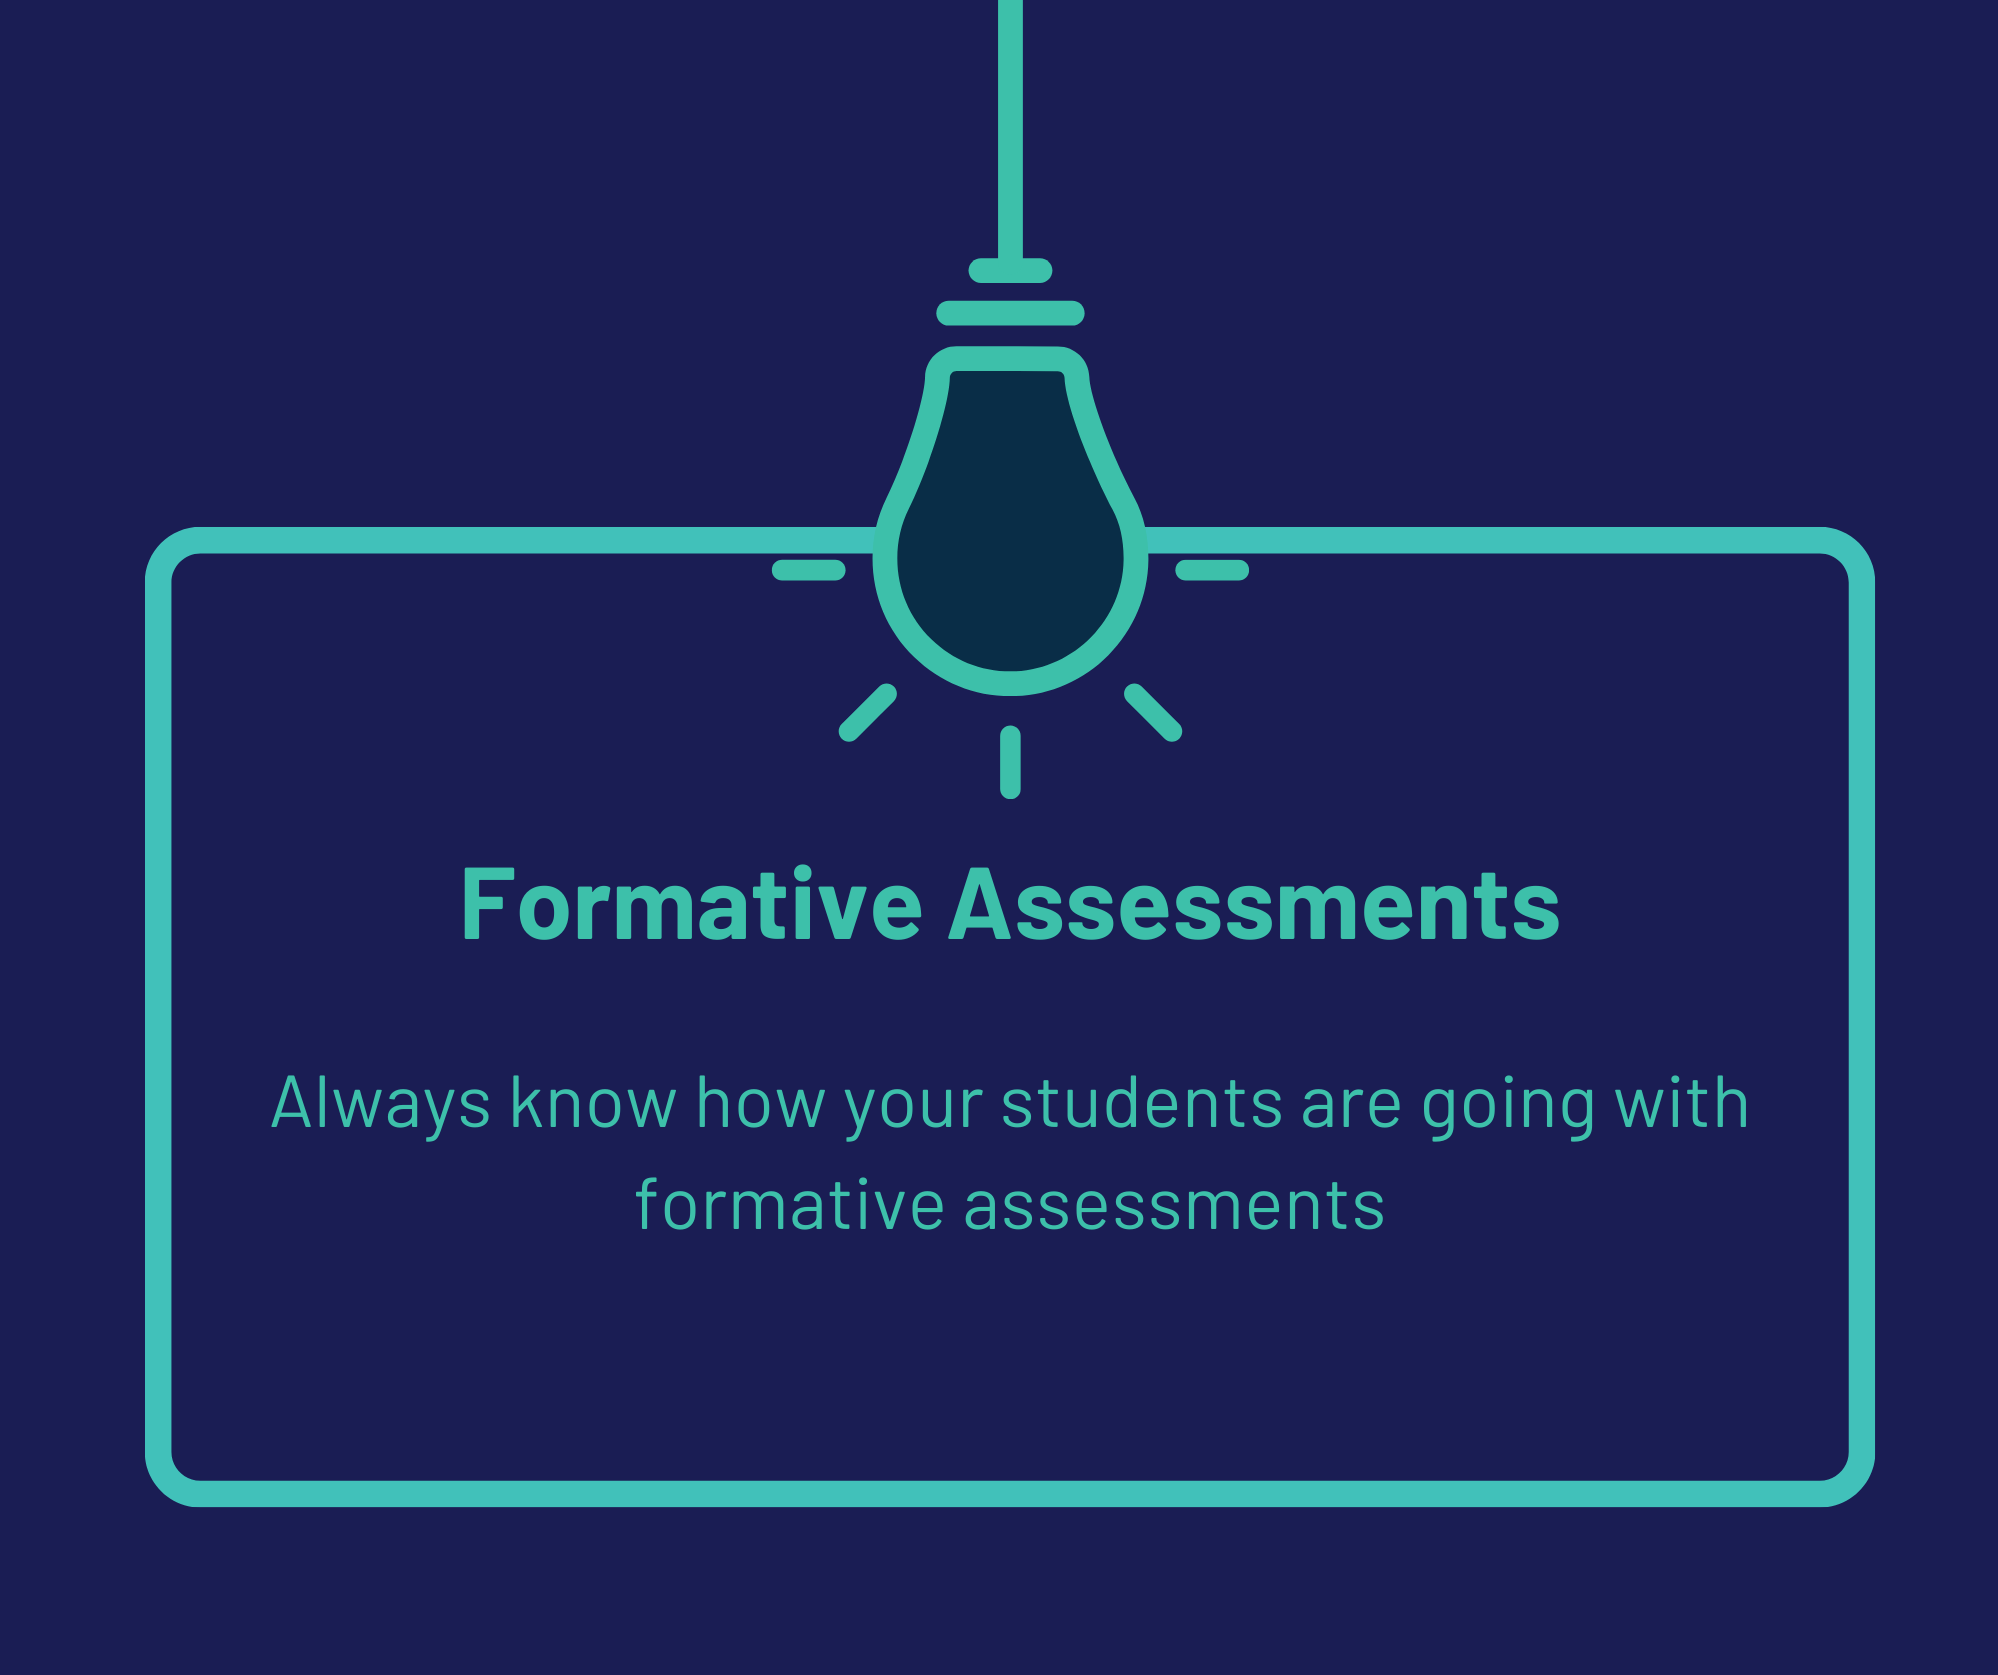 Create Formative Assessments with an AI Chatbot